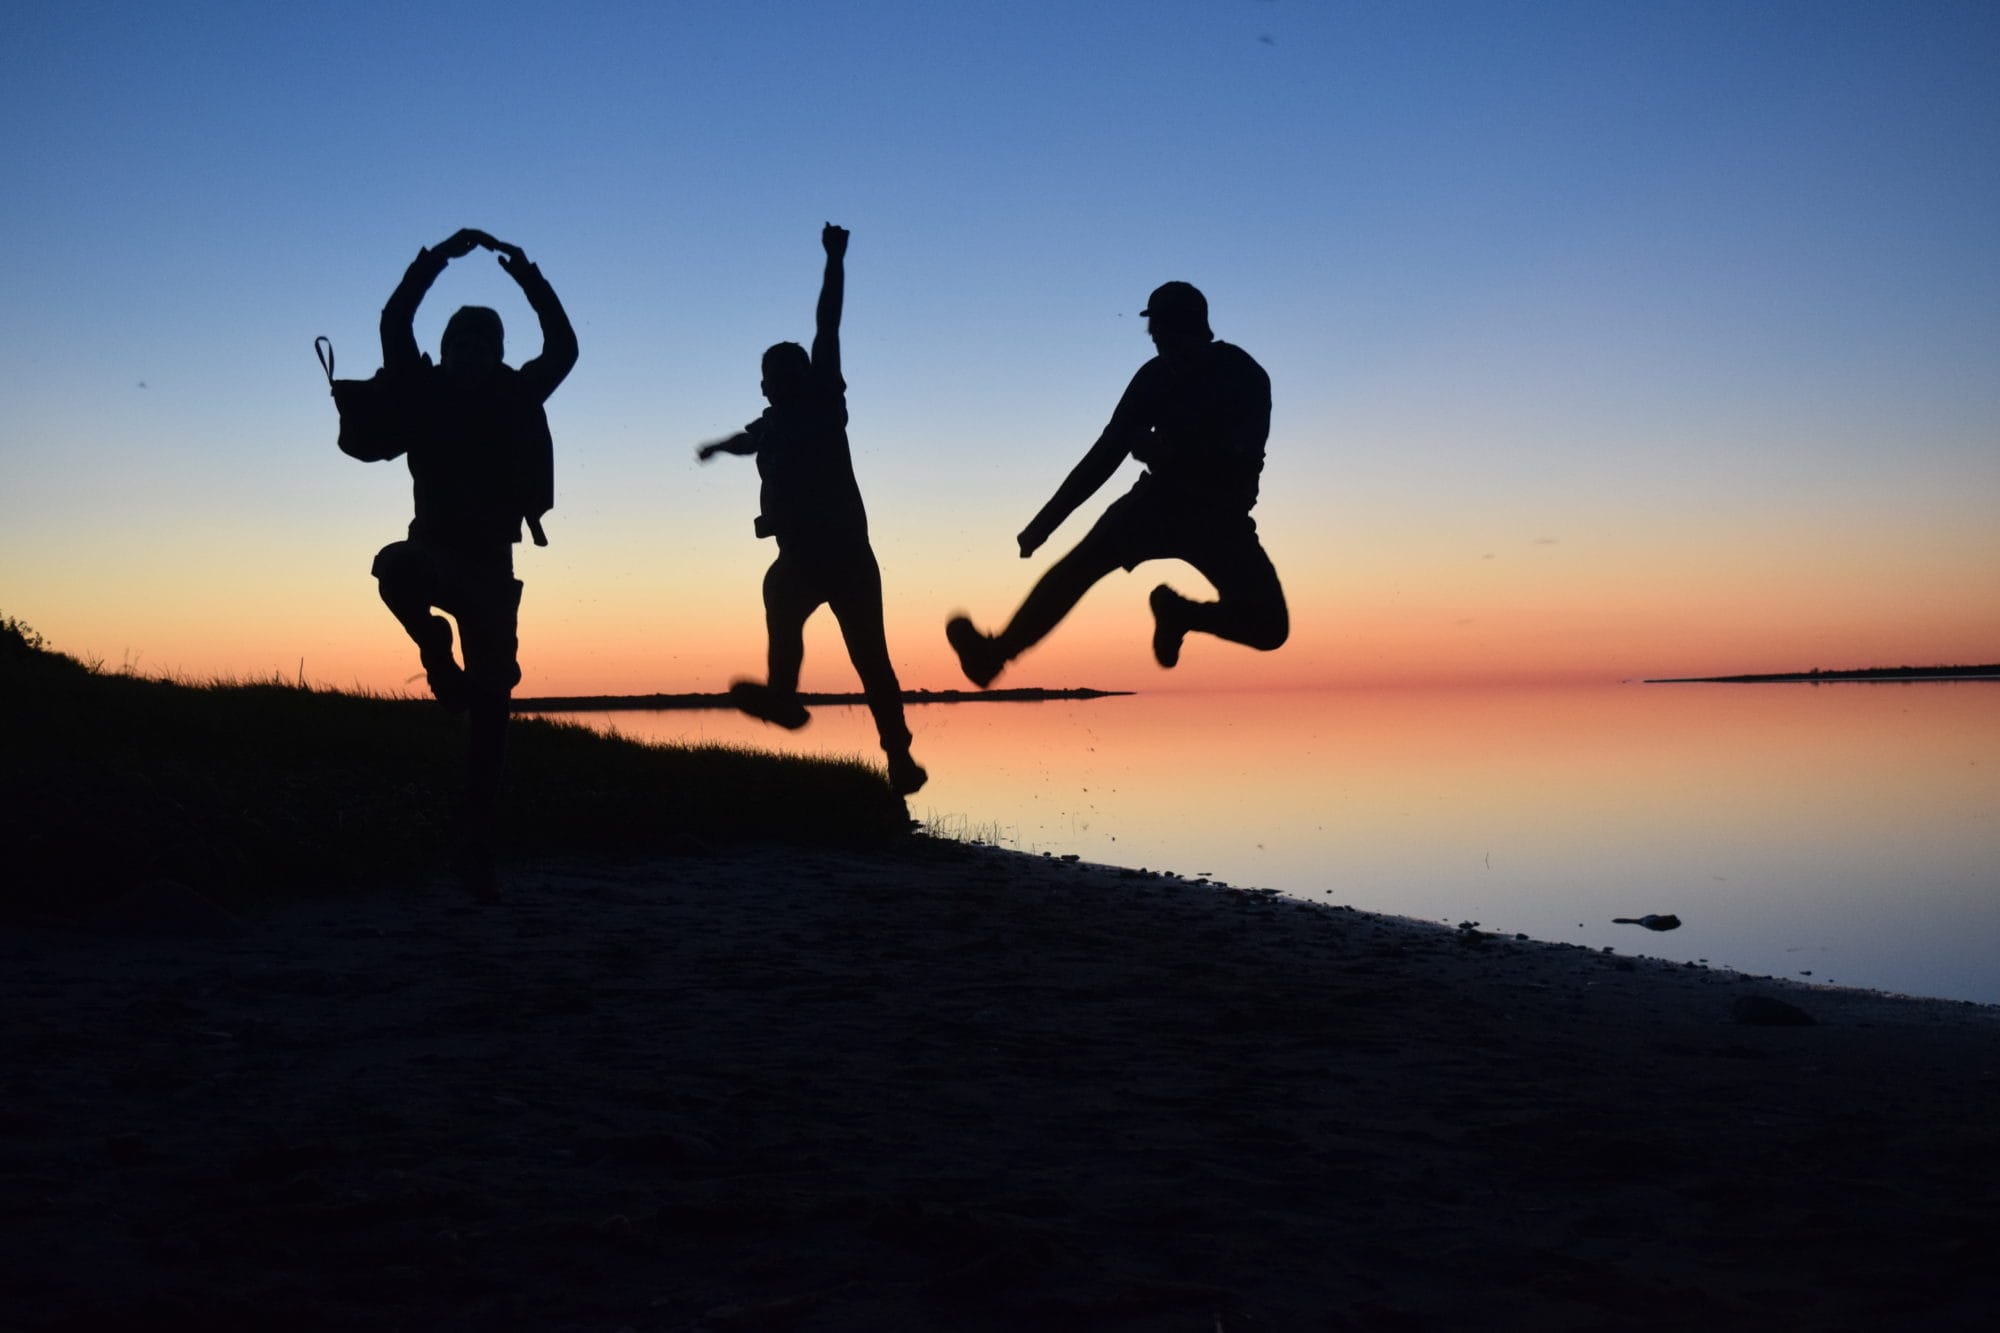 young men leaping into air silhouetted against sunset